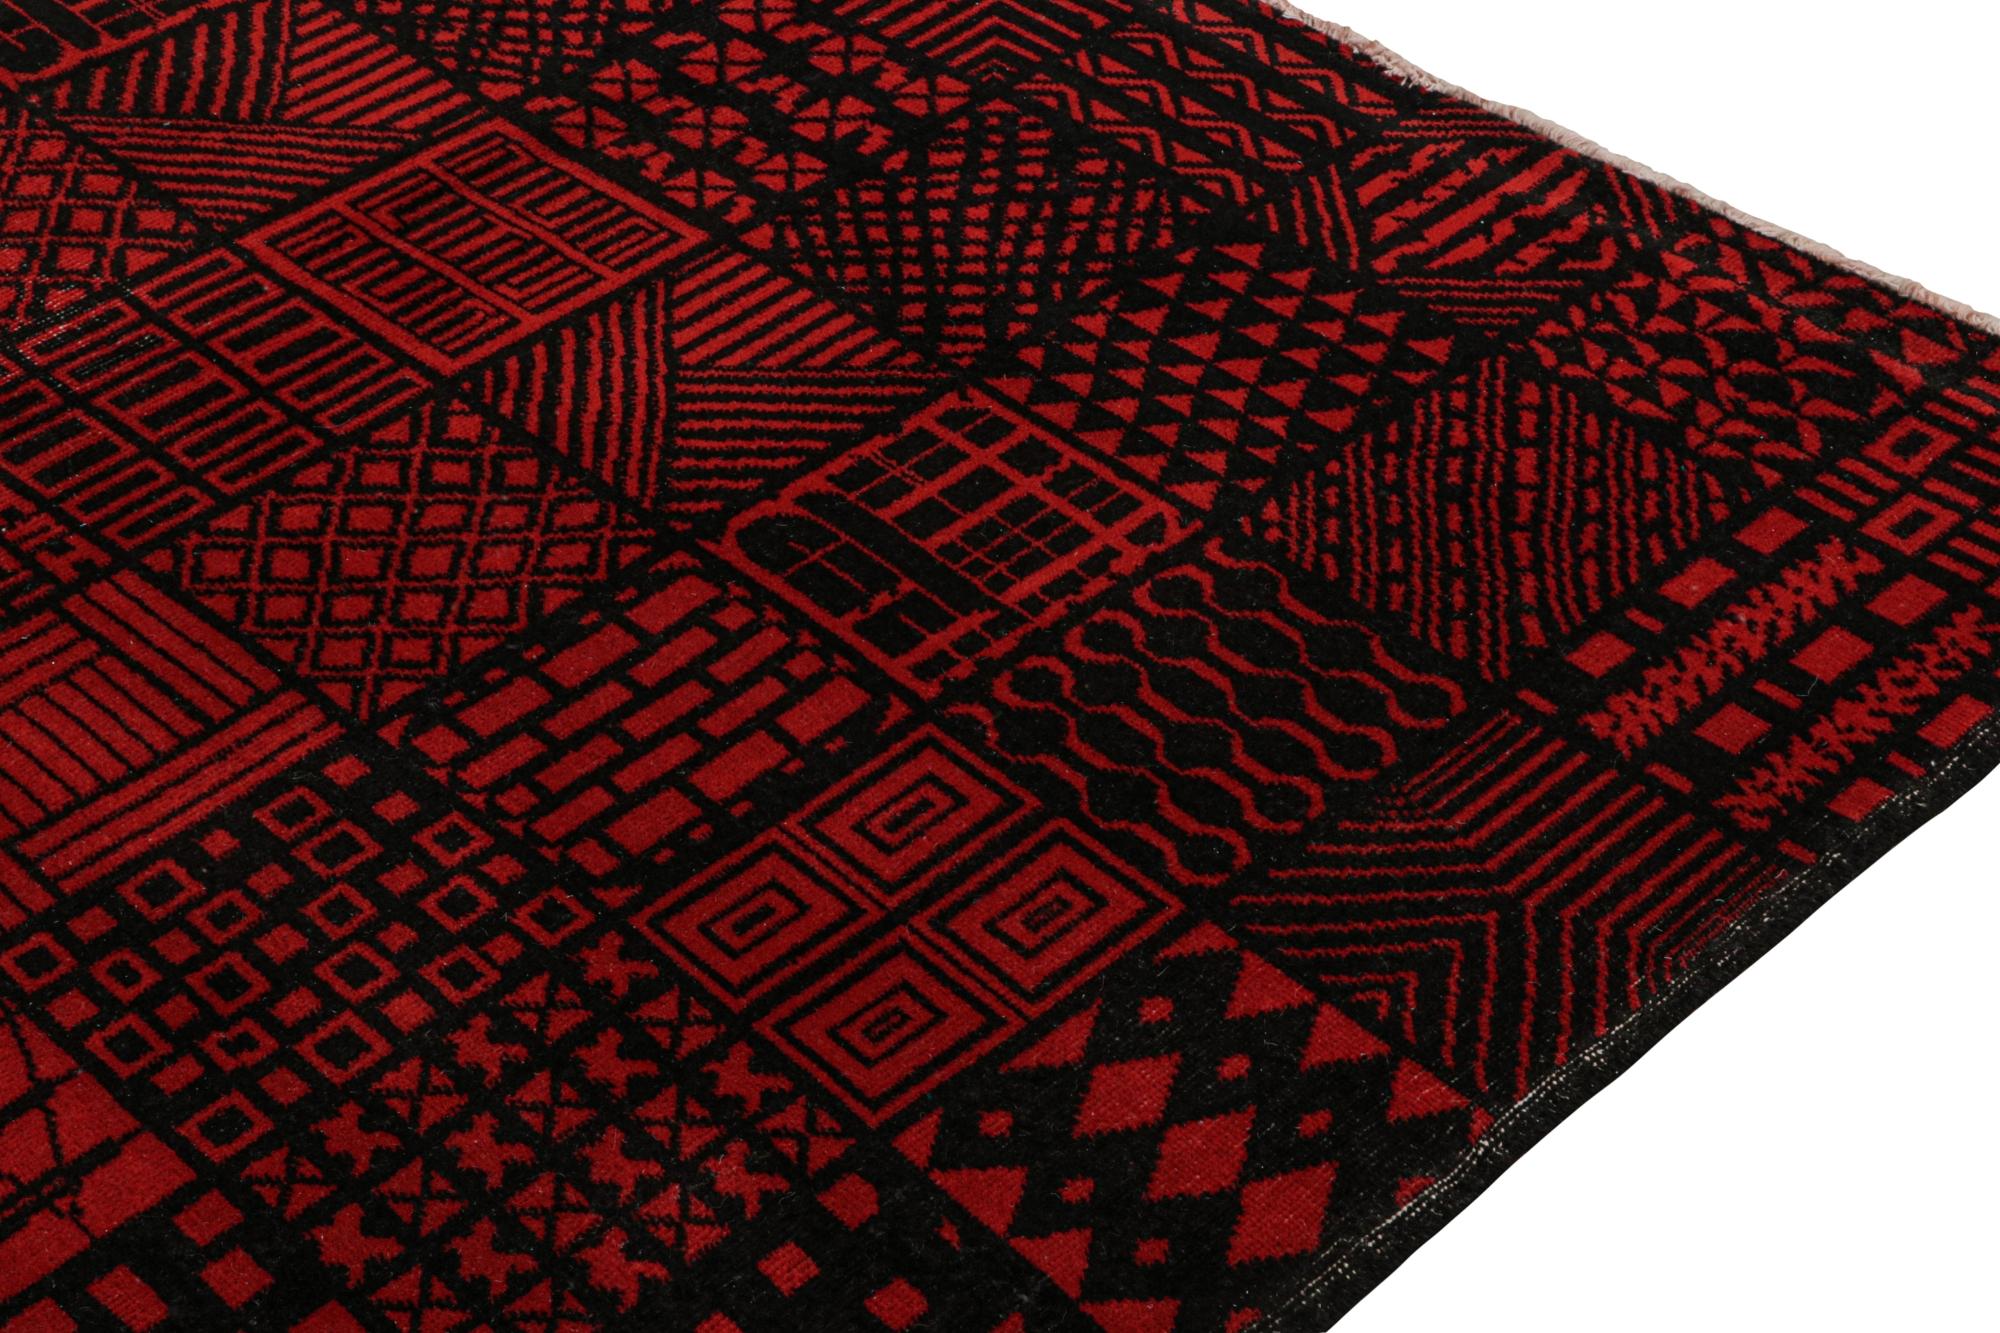 Vintage Zeki Müren Rug in Red & Black Geometric Patterns, by Rug & Kilim In Good Condition For Sale In Long Island City, NY